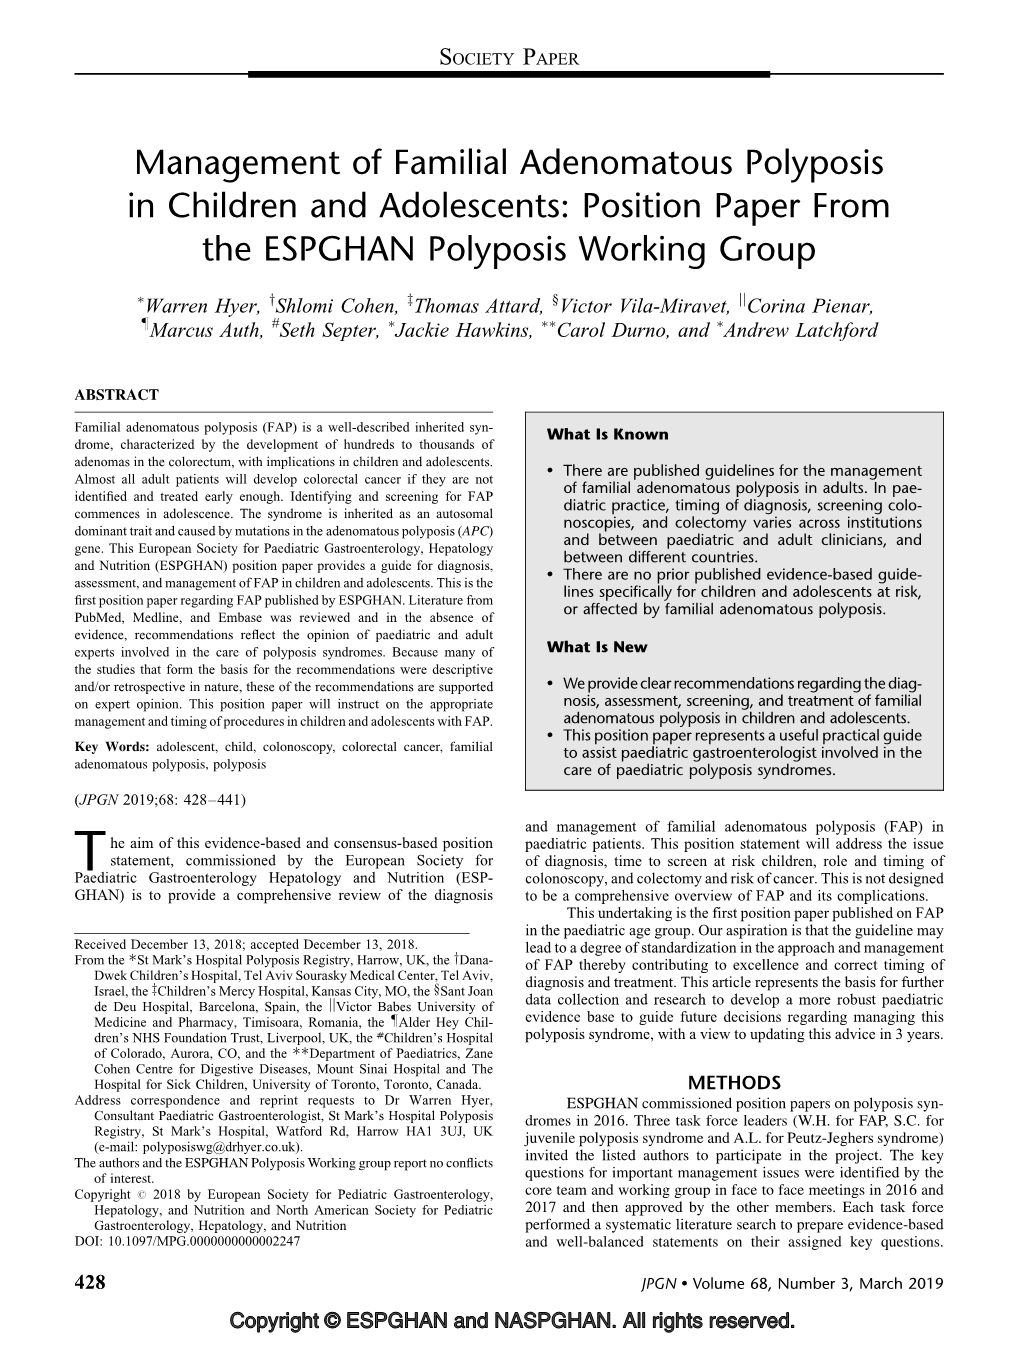 Management of Familial Adenomatous Polyposis in Children and Adolescents: Position